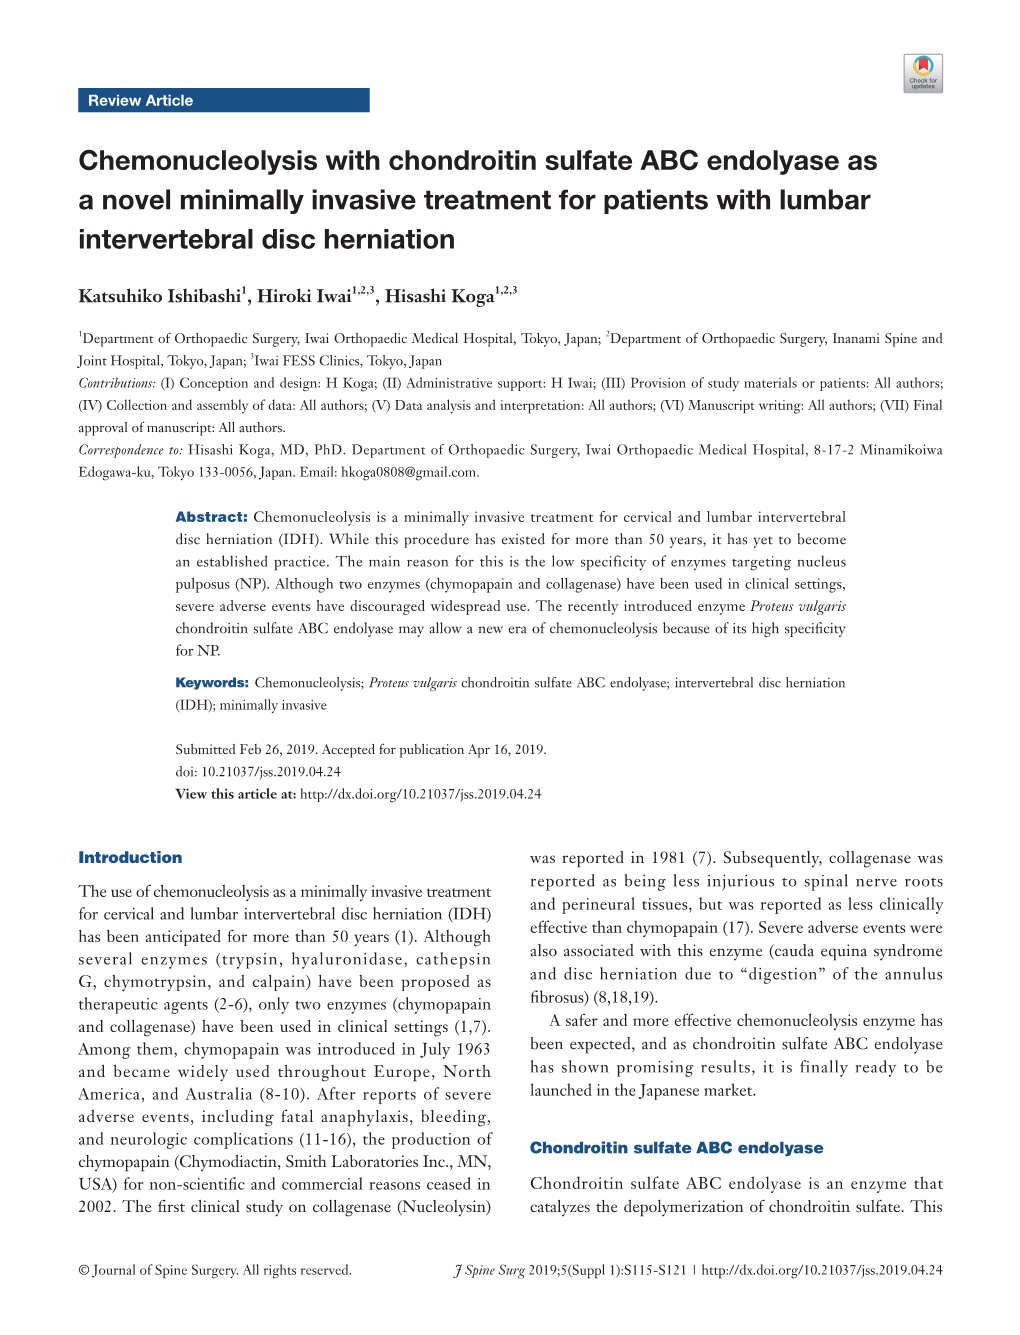 Chemonucleolysis with Chondroitin Sulfate ABC Endolyase As a Novel Minimally Invasive Treatment for Patients with Lumbar Intervertebral Disc Herniation